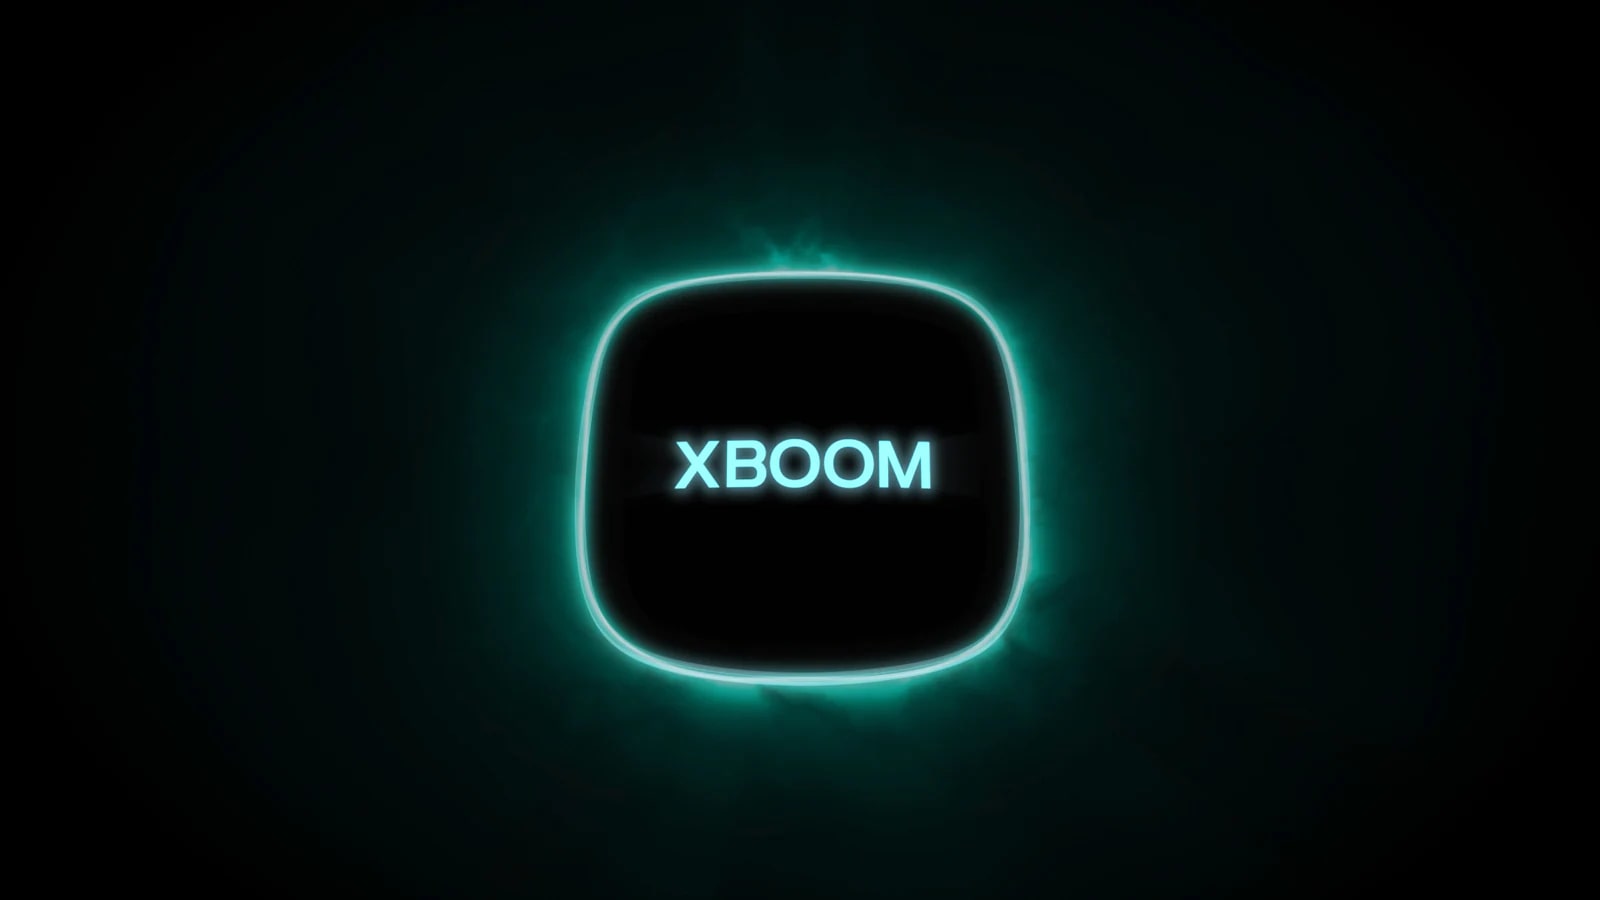 A short design film for LG XBOOM Go XG9. Play the video